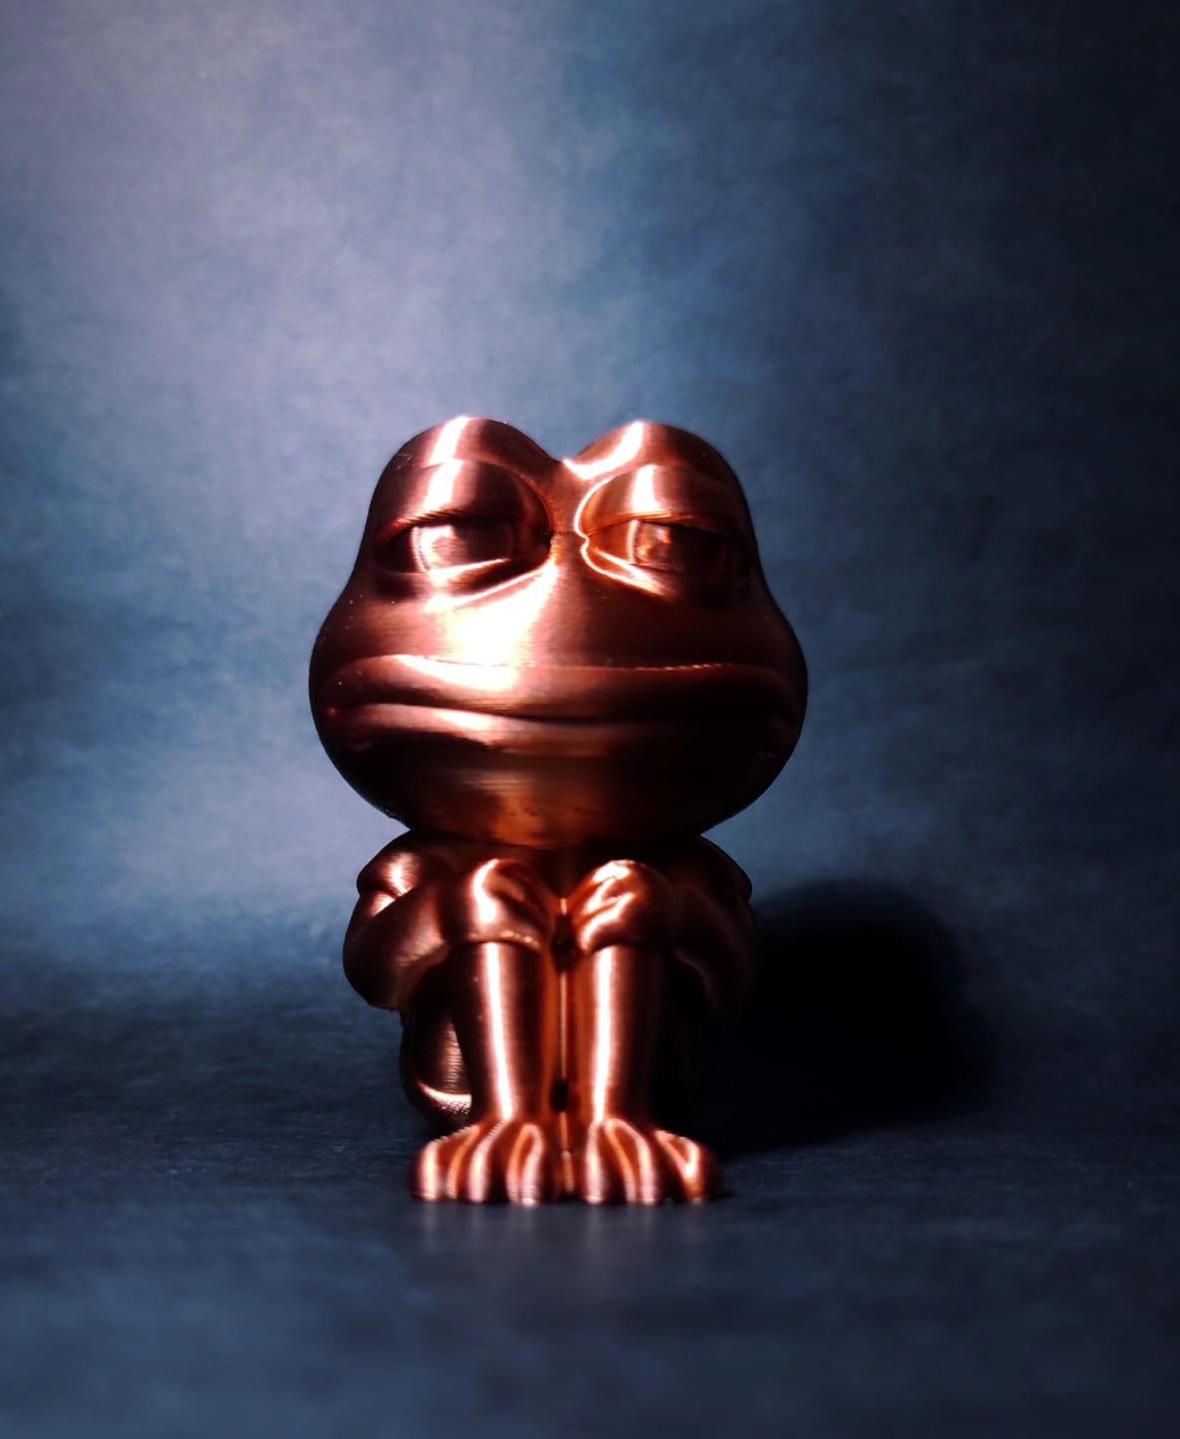 Pepe the frog - Awesome model!

Check my insta page @3Doodling for more makes! ;) - 3d model